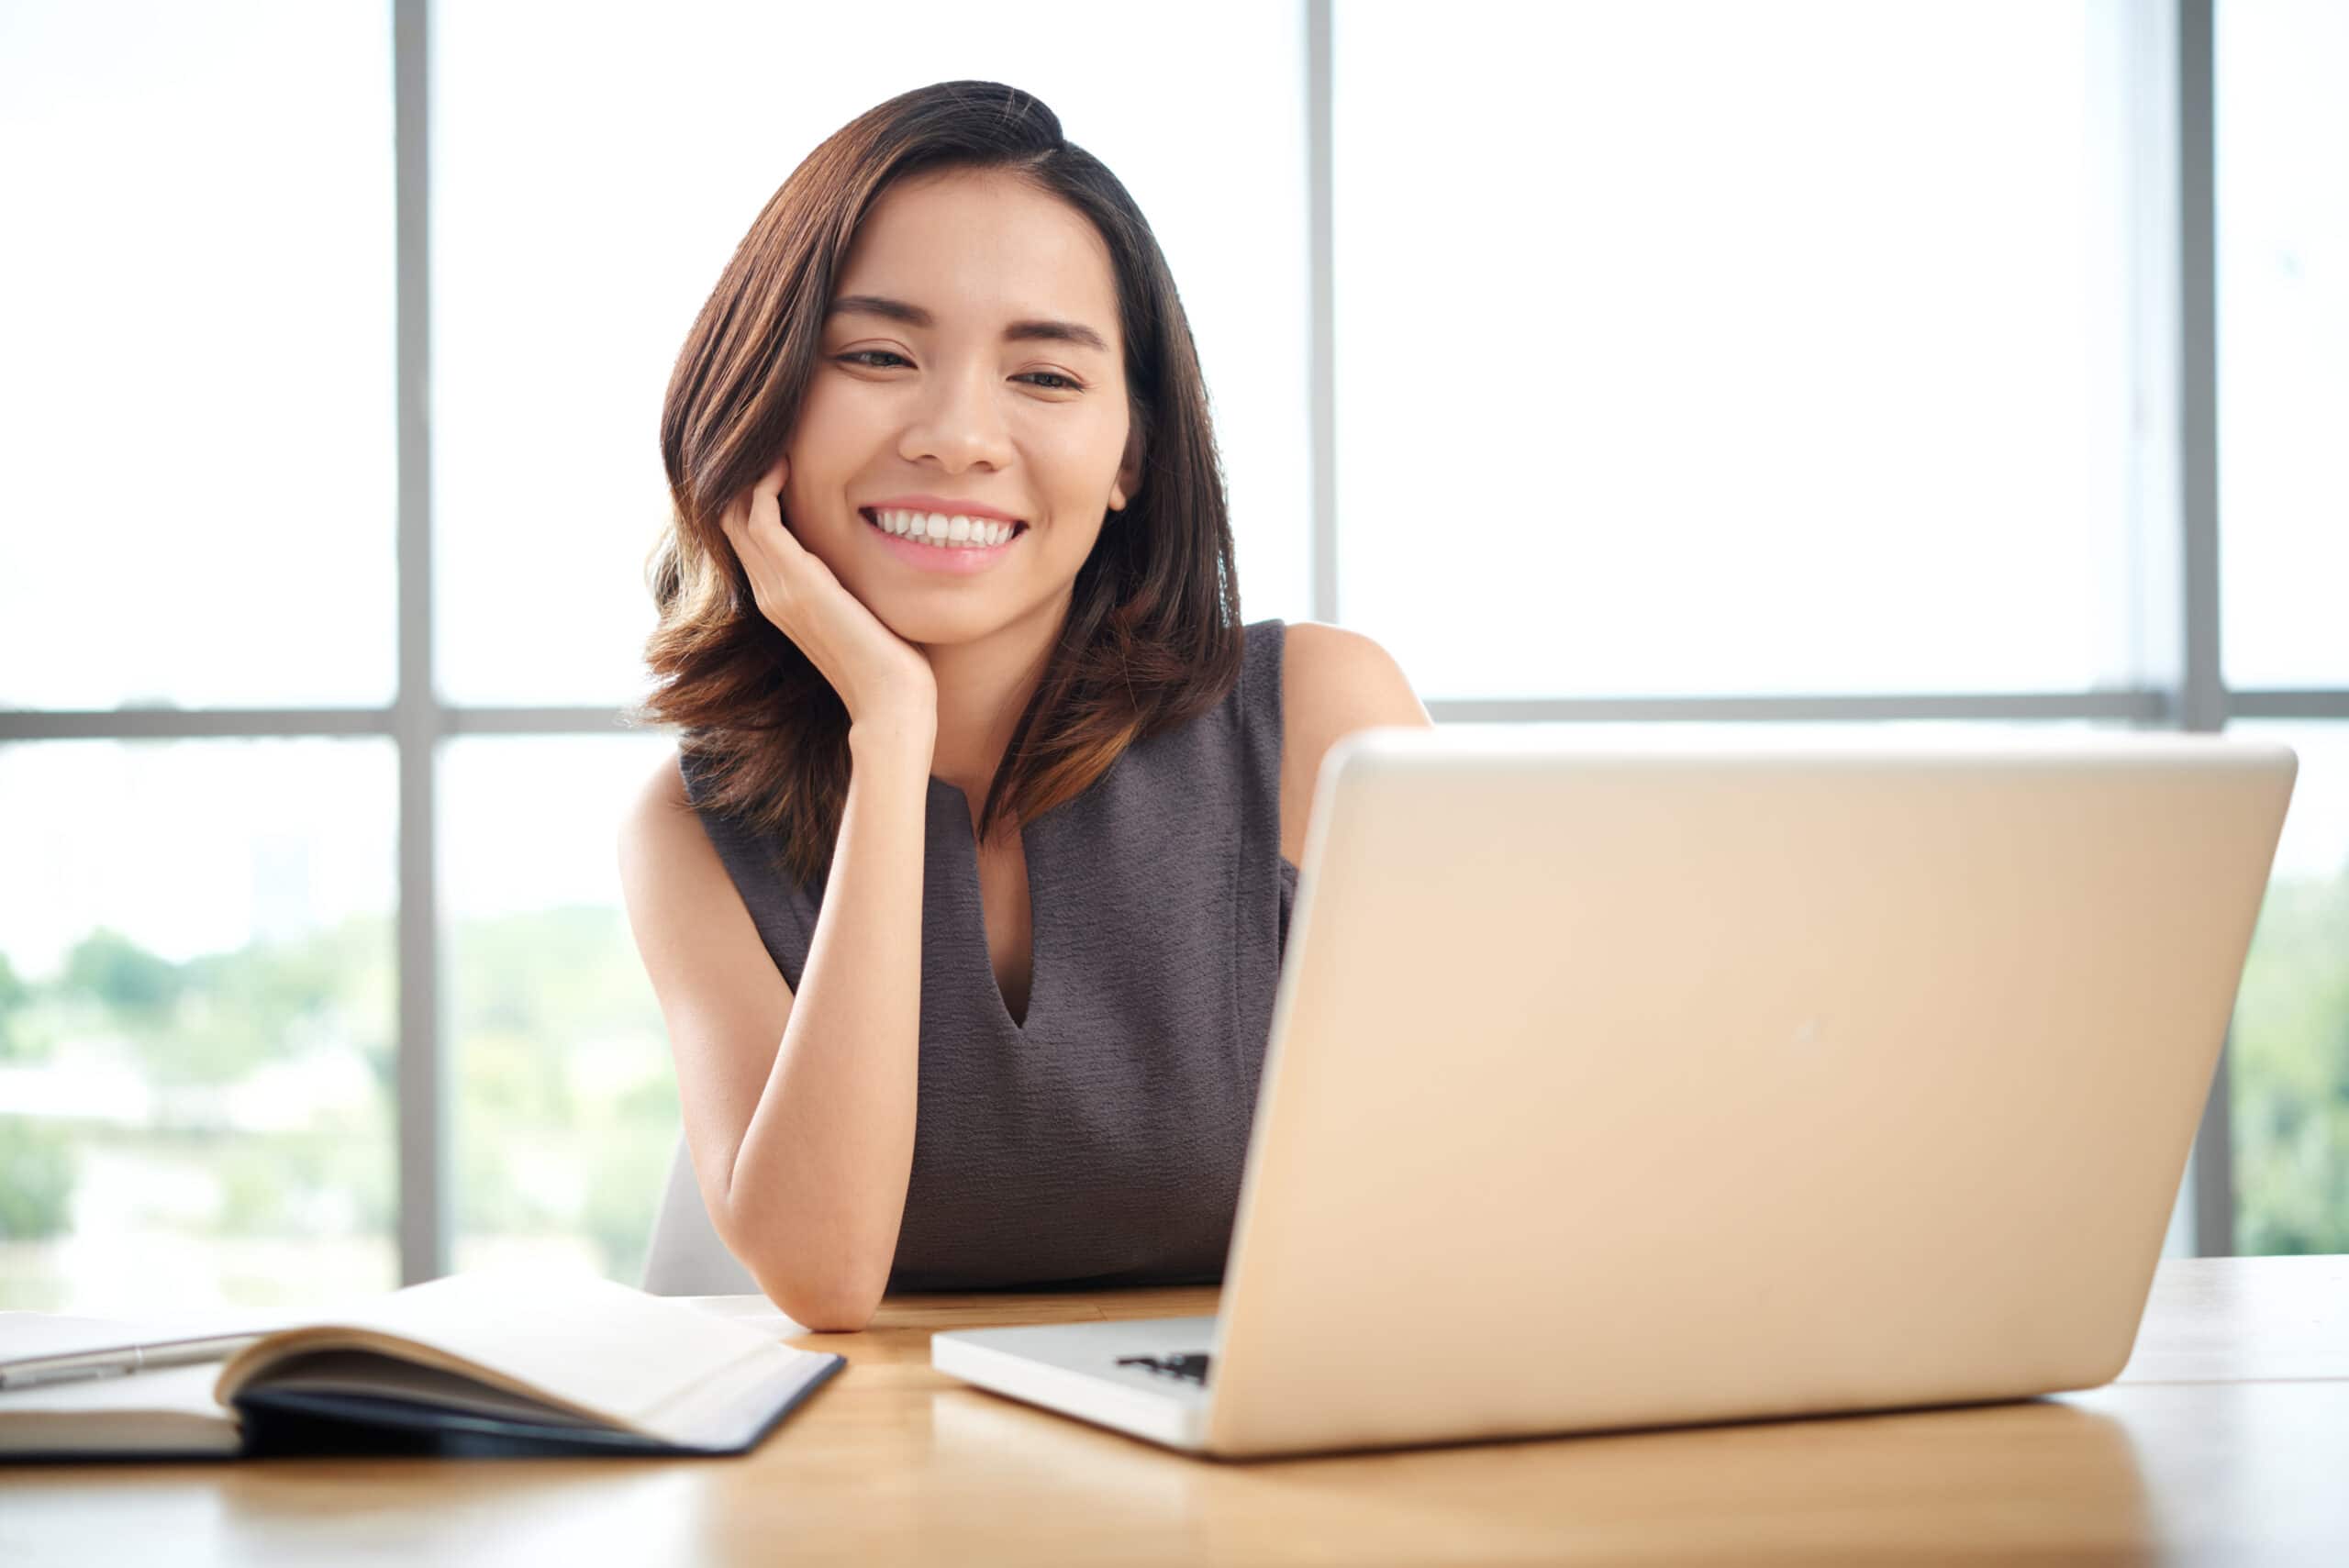 A young woman, facing the camera, sits in front of a laptop smiling. To her side is an open notebook.